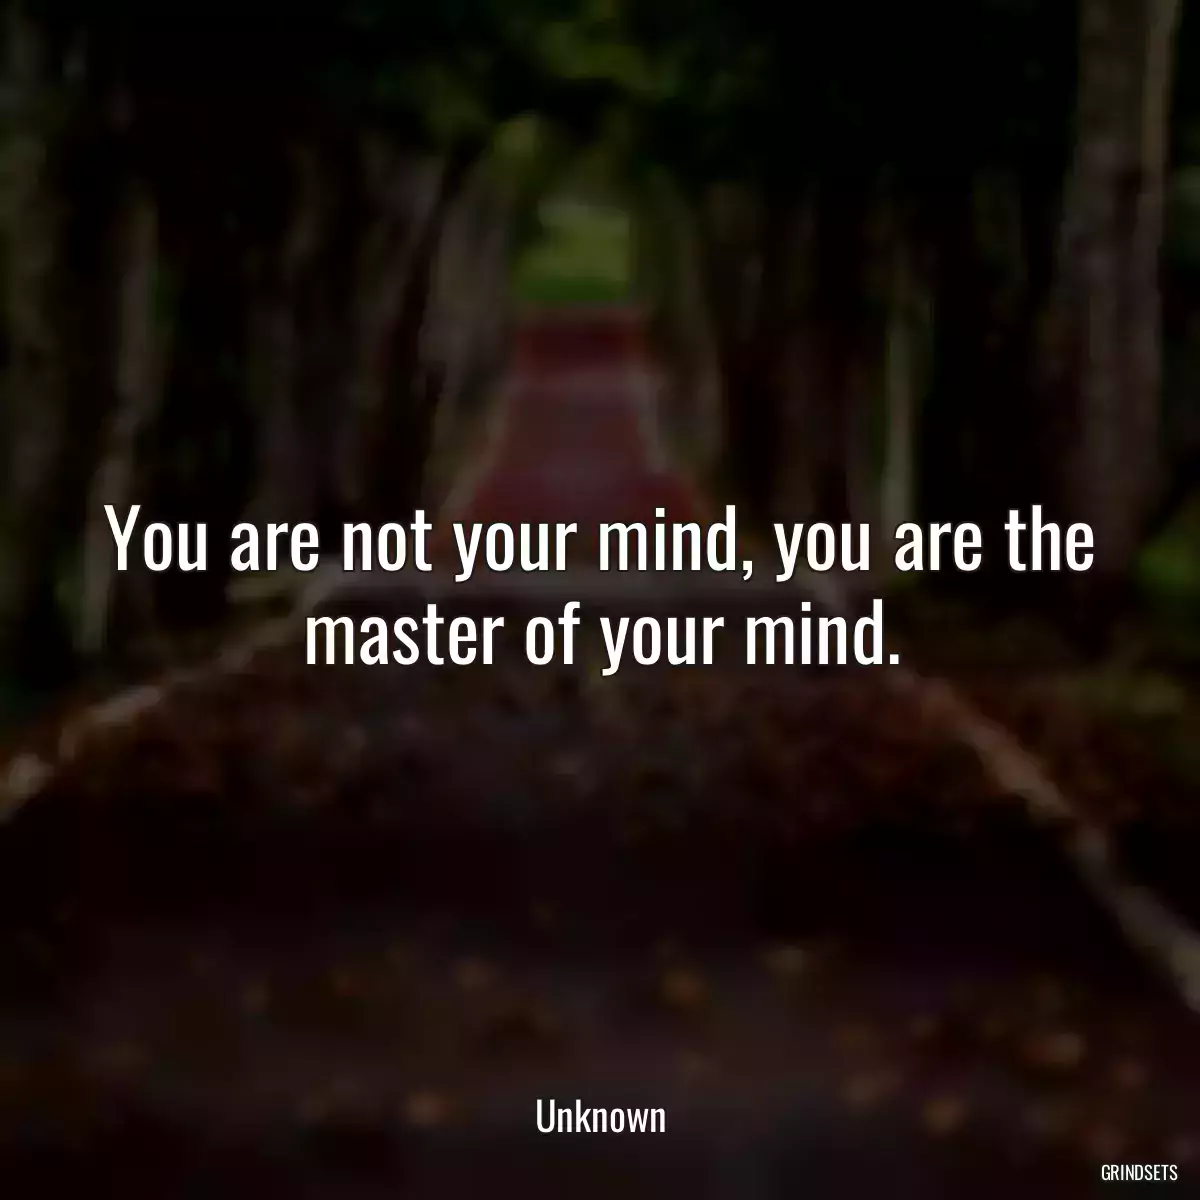 You are not your mind, you are the master of your mind.